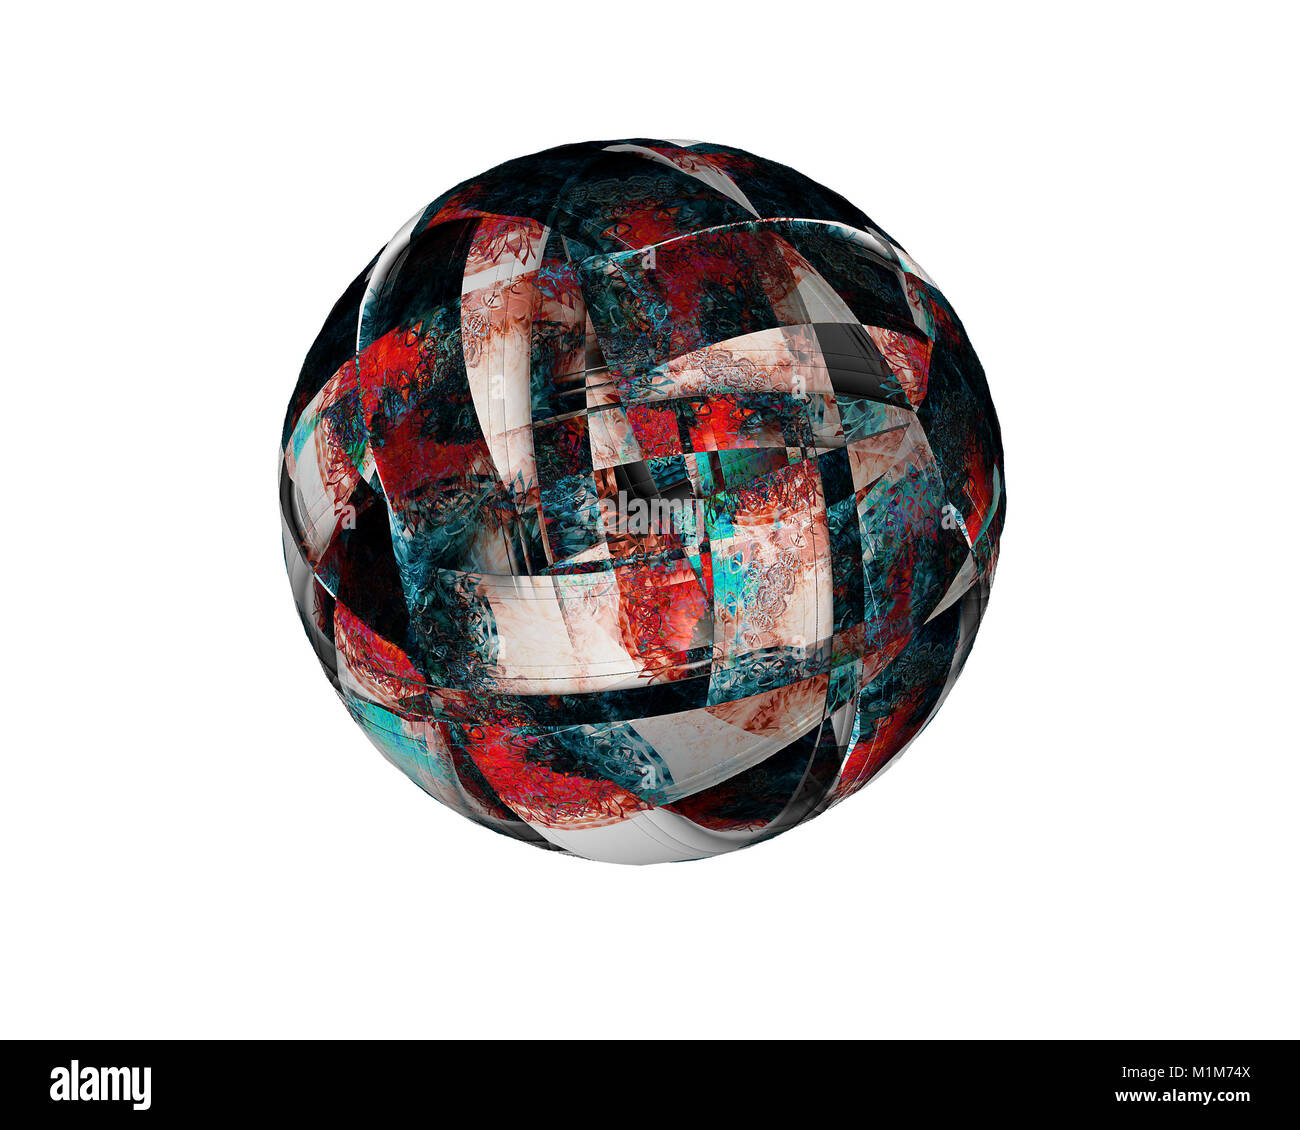 Digital art of a concentric ball Stock Photo